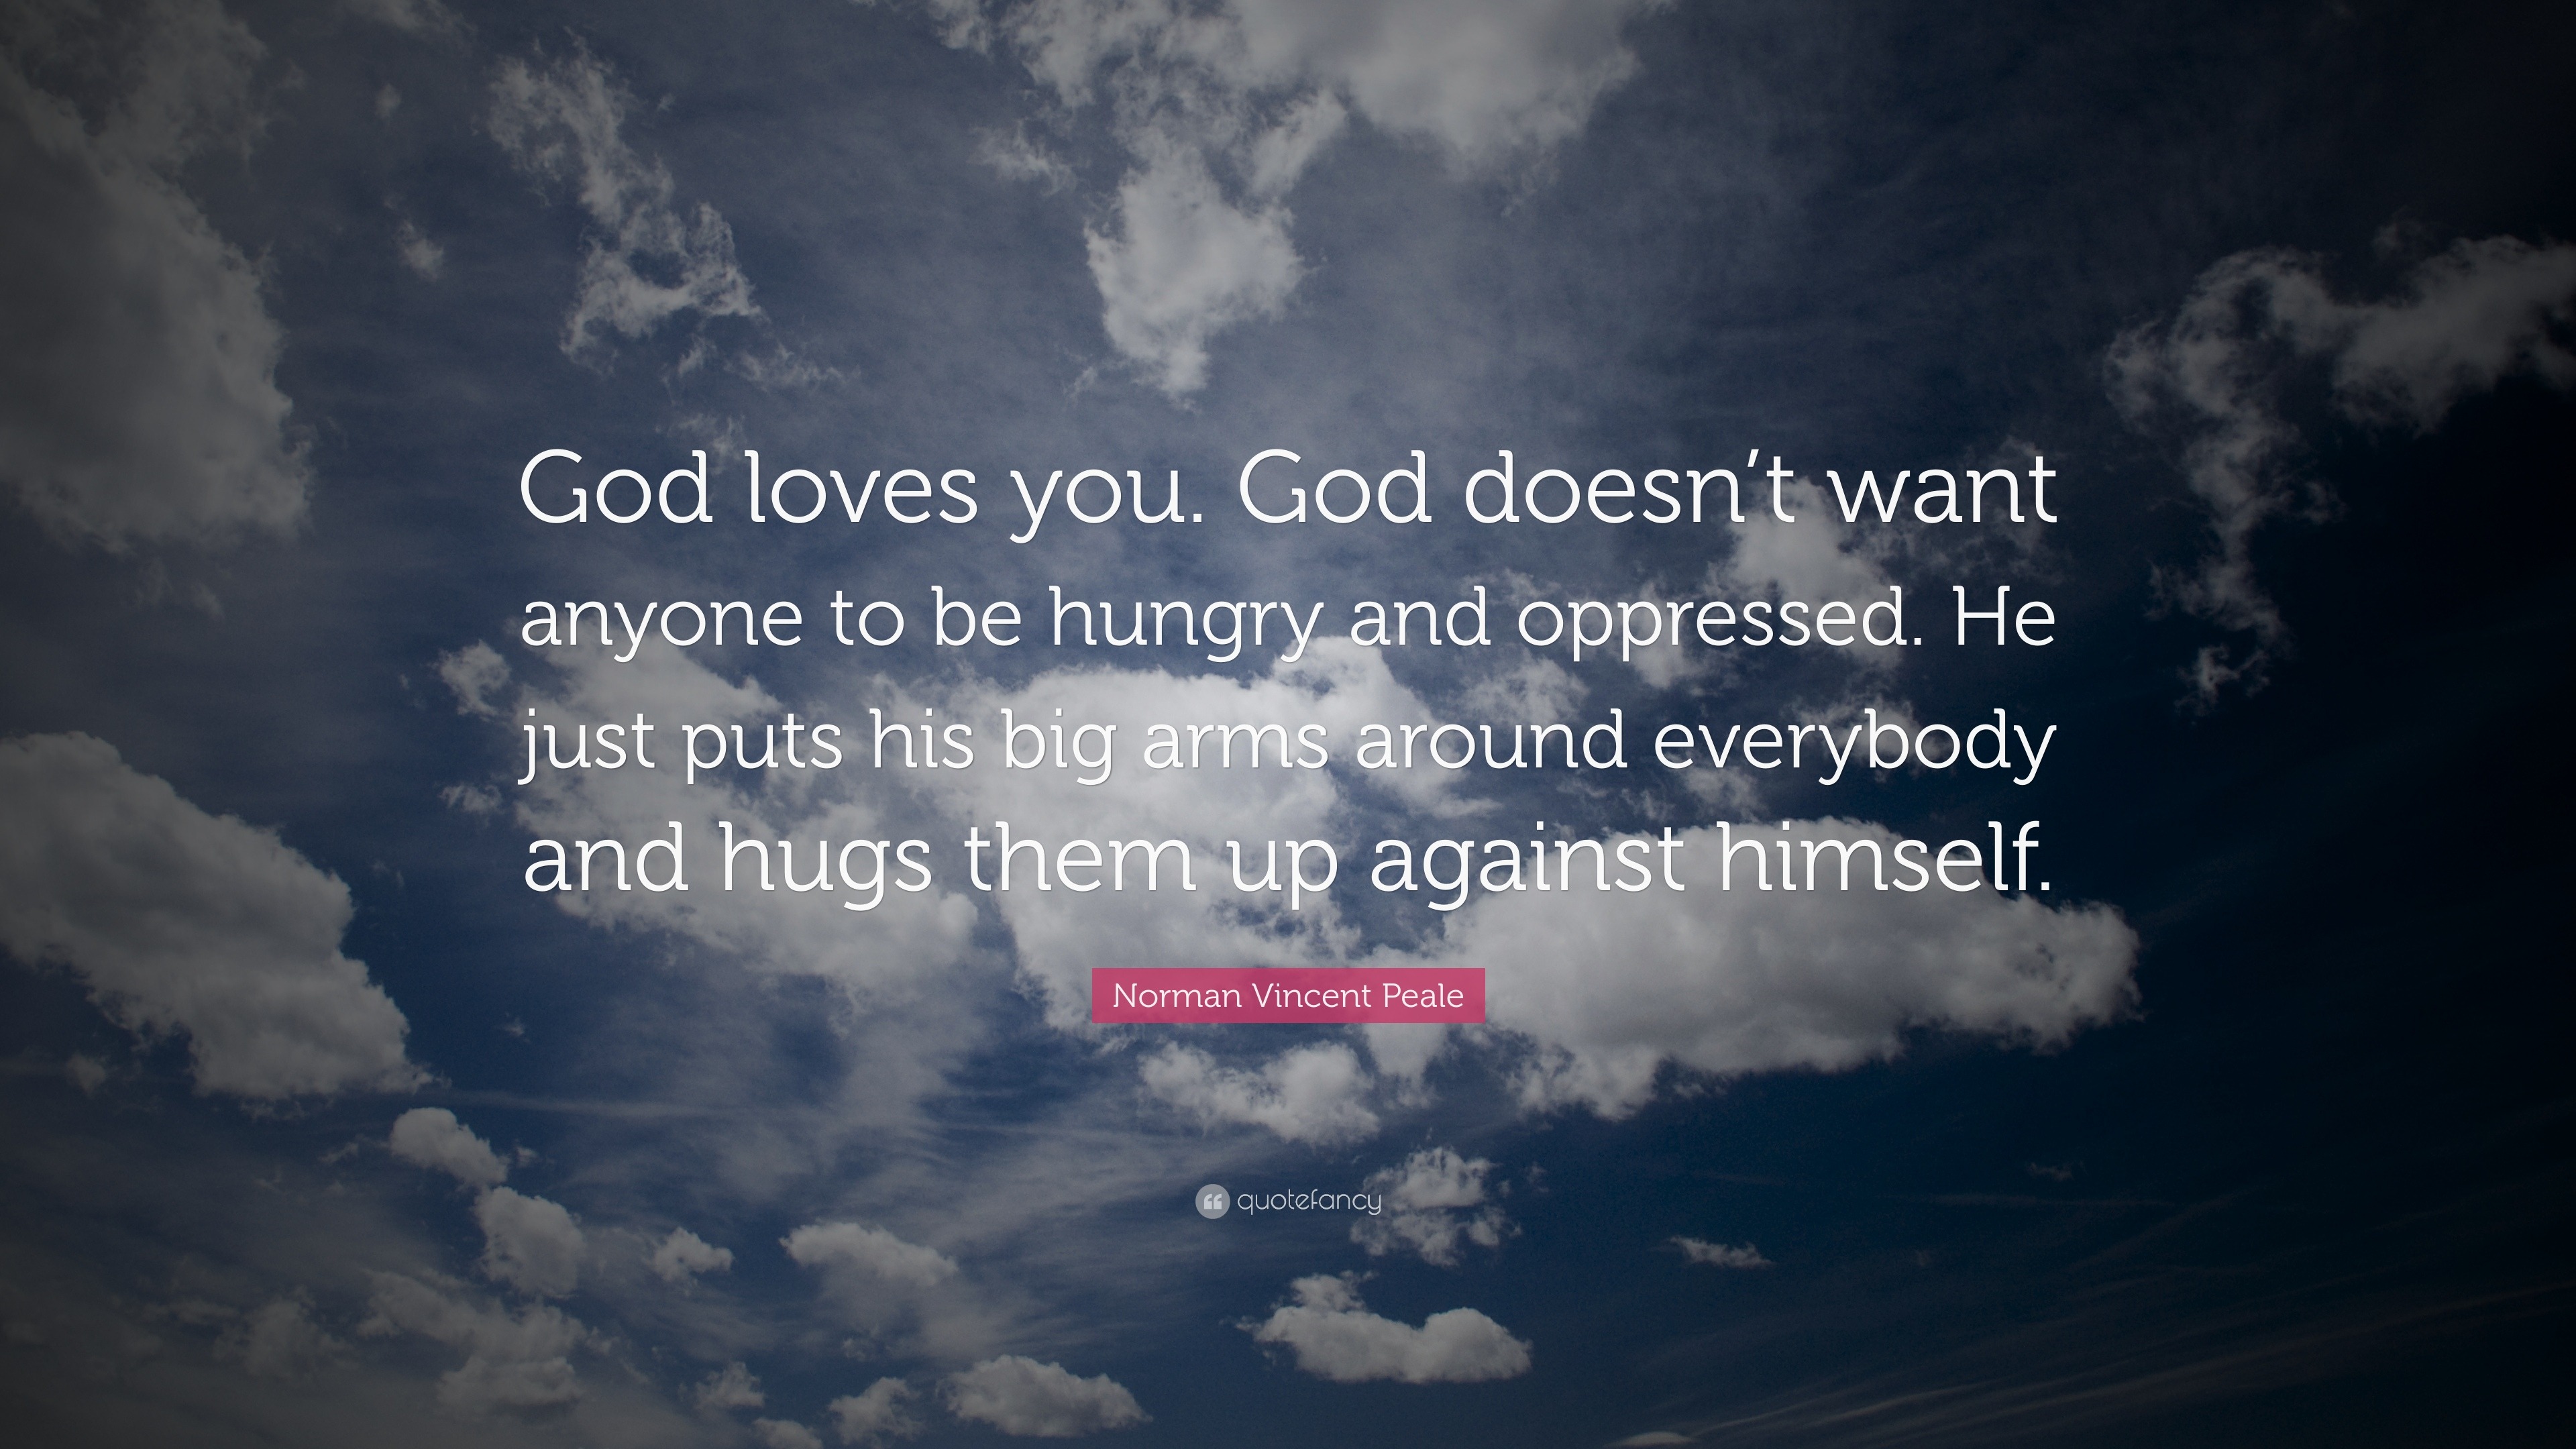 Norman Vincent Peale Quote “God loves you God doesn t want anyone